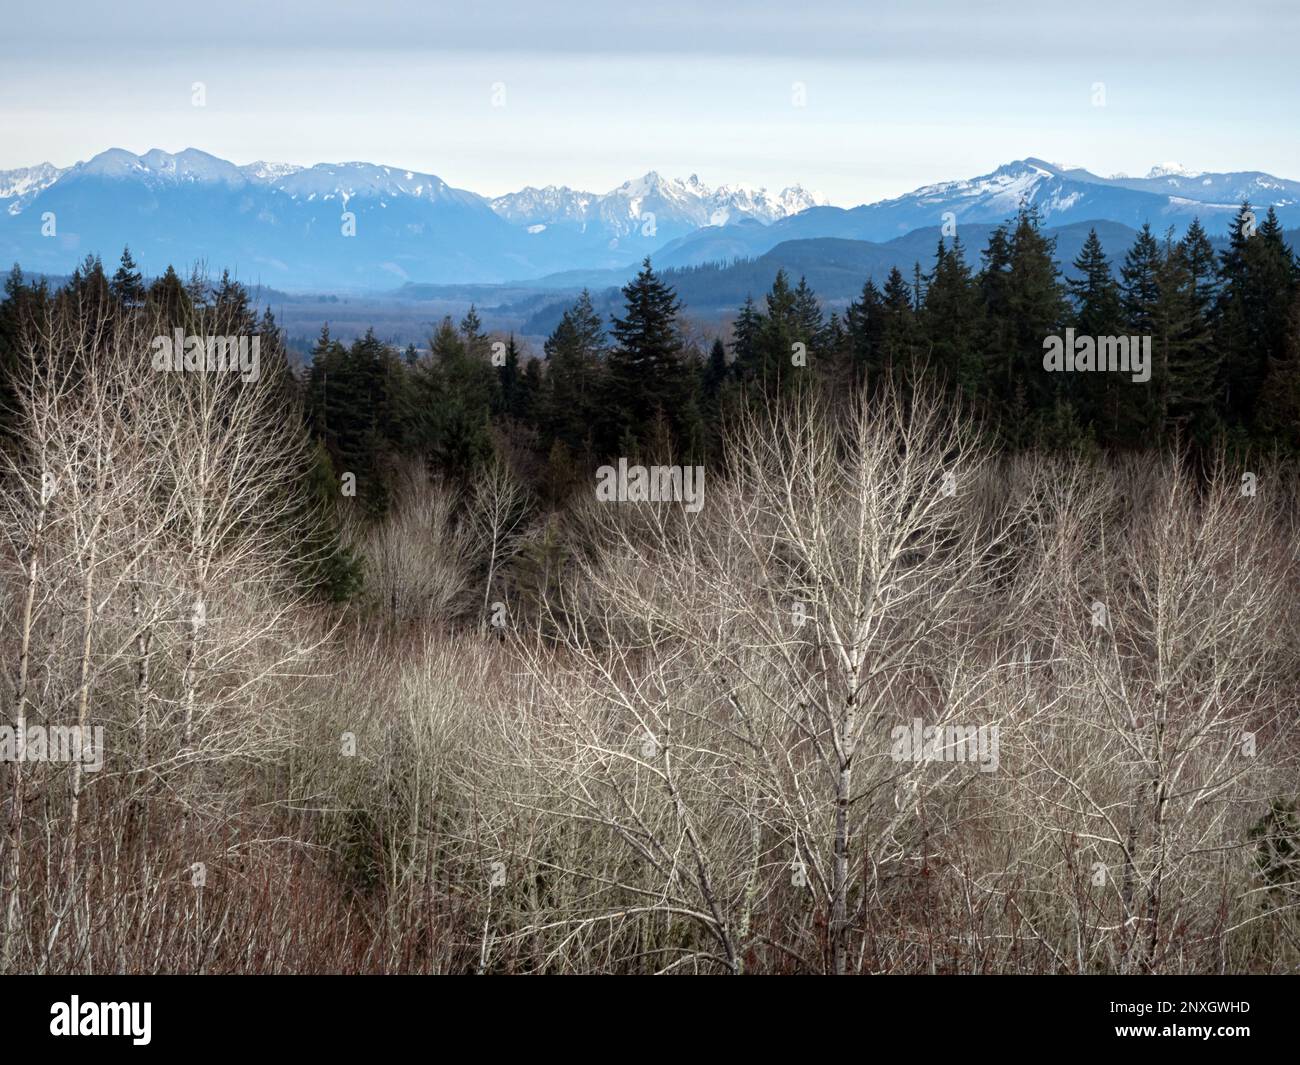 WA23164-00...WASHINGTON - View east, up the Skykomish River Valley to the Cascade Mountain Range from viewpoint in Lord Hill Regional Park. Stock Photo